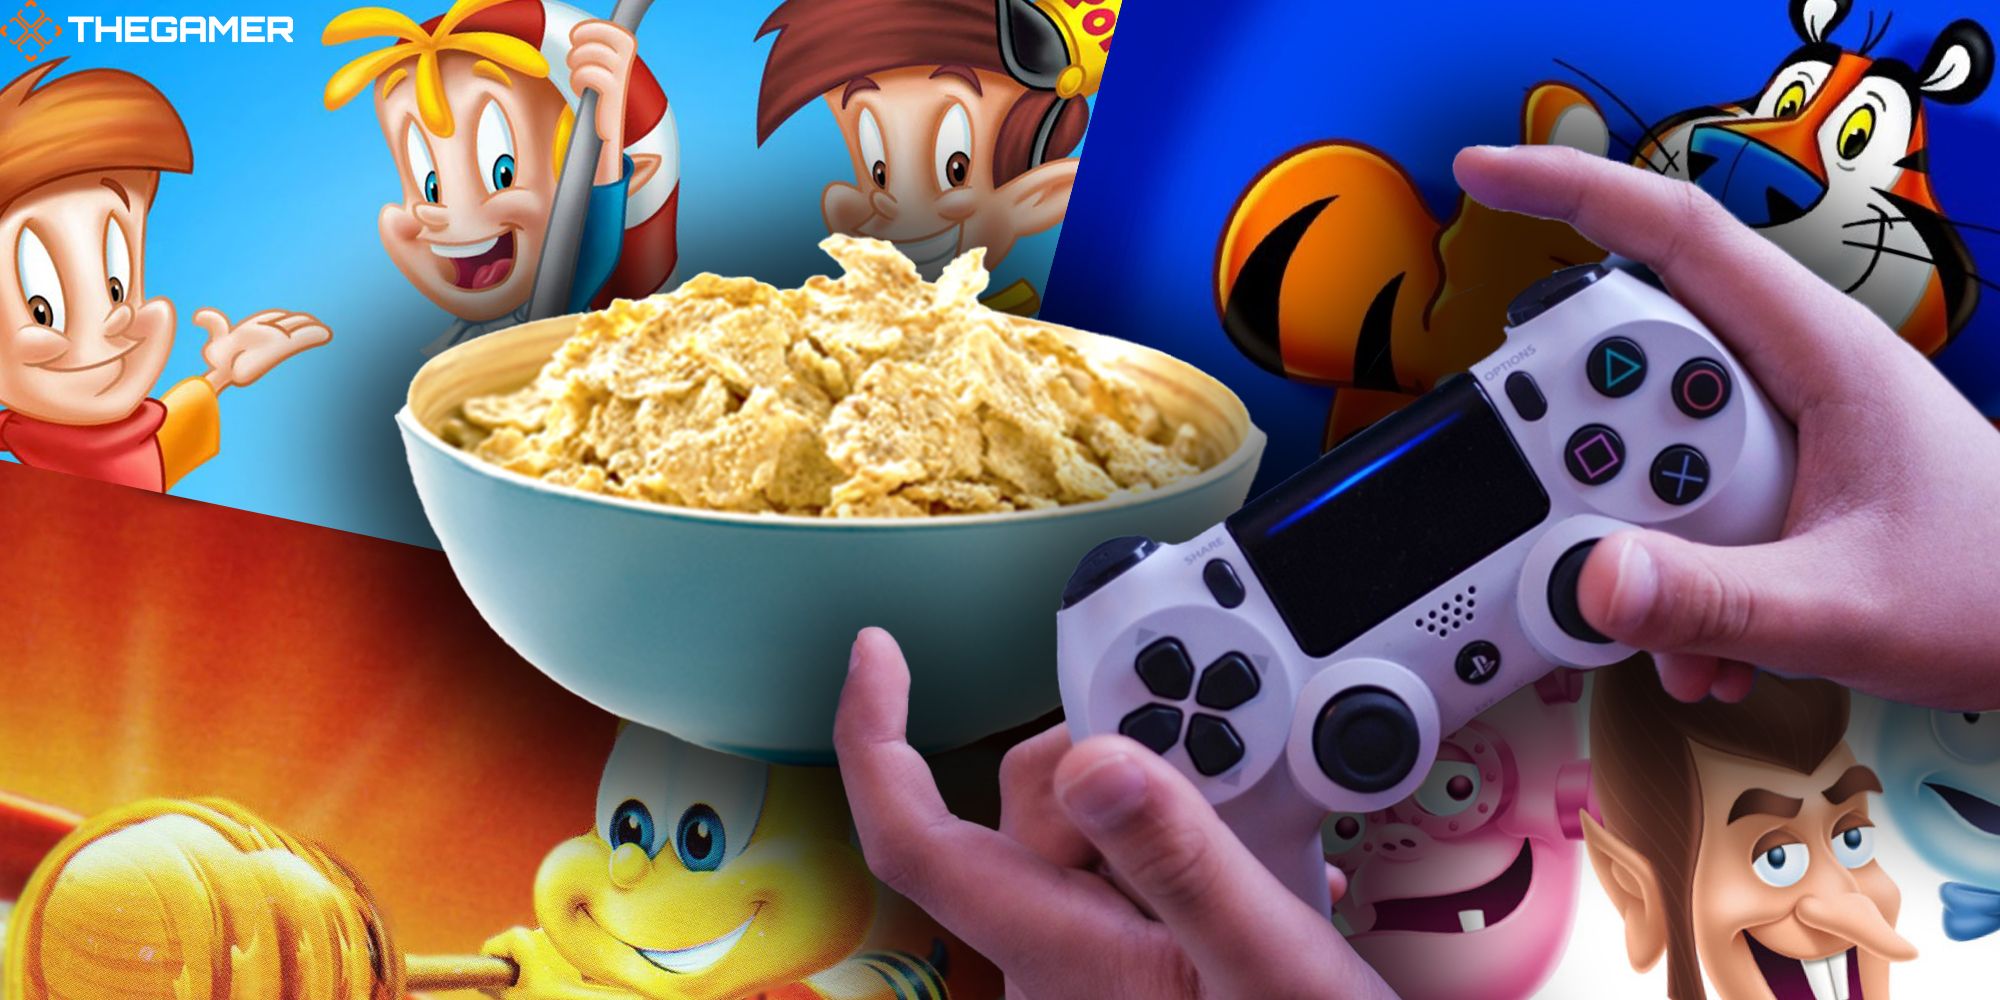 A Dualshock 4 controller in front of a bowl of cereal and various mascots, like Snap, Crackle, Pop, Buzz The Bee, Tony The Tiger, Franken-Berry, Count Chocula, and Boo-Berry.